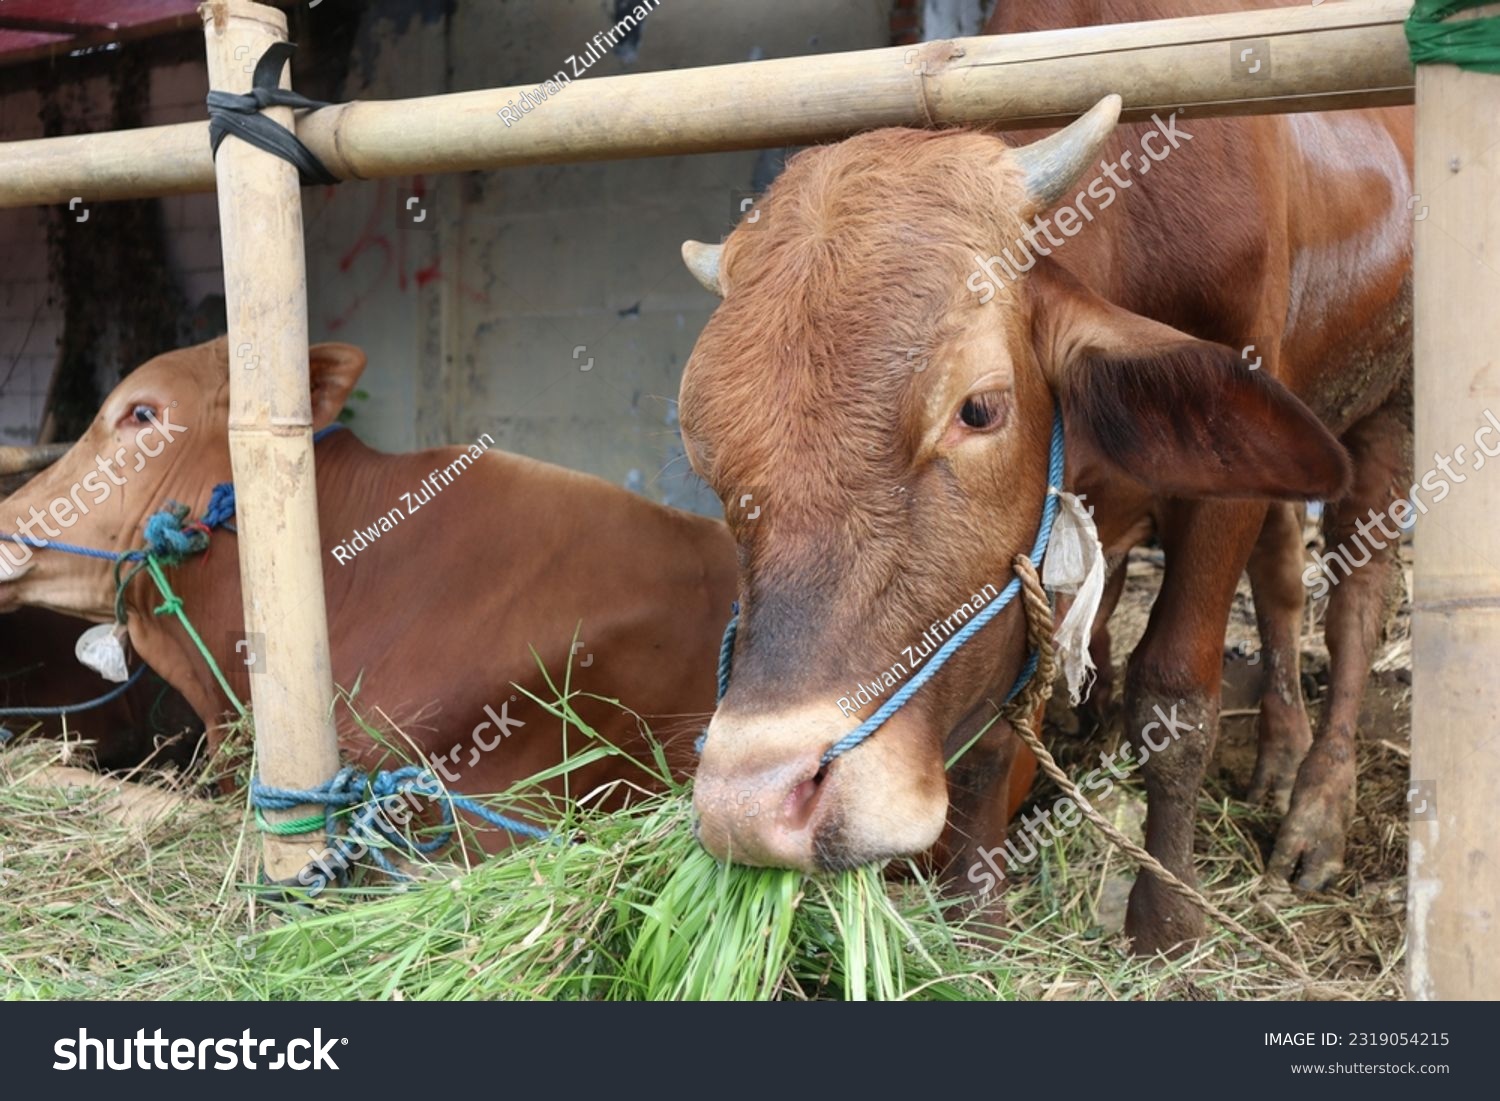 Some cows (sapi) in the traditional animal market in preparation for the Eid al-Adha day #2319054215